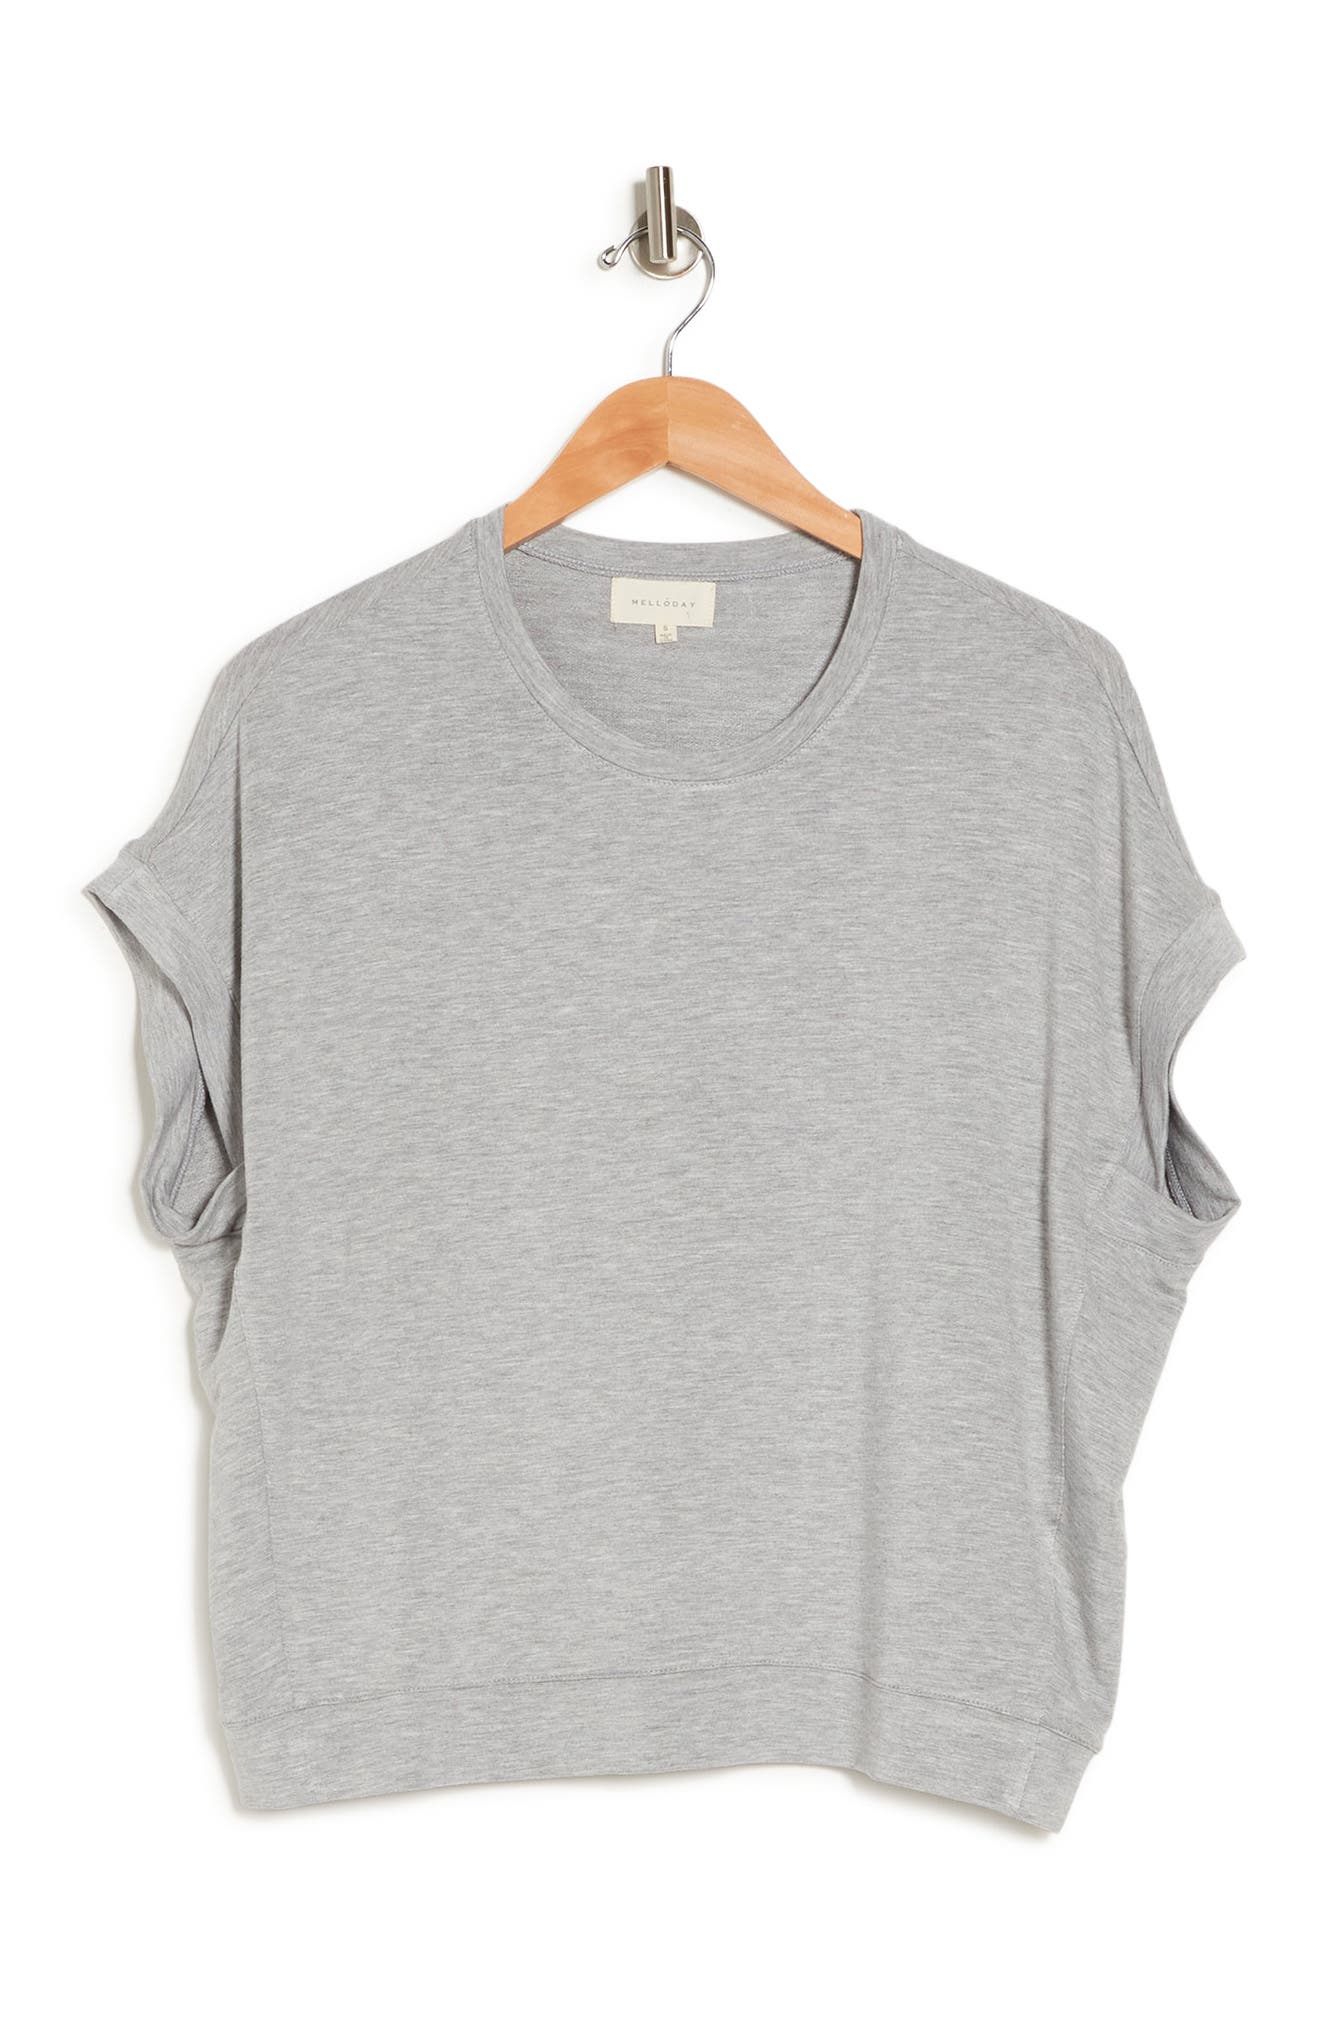 Melloday Solid Boxy Top In H Grey